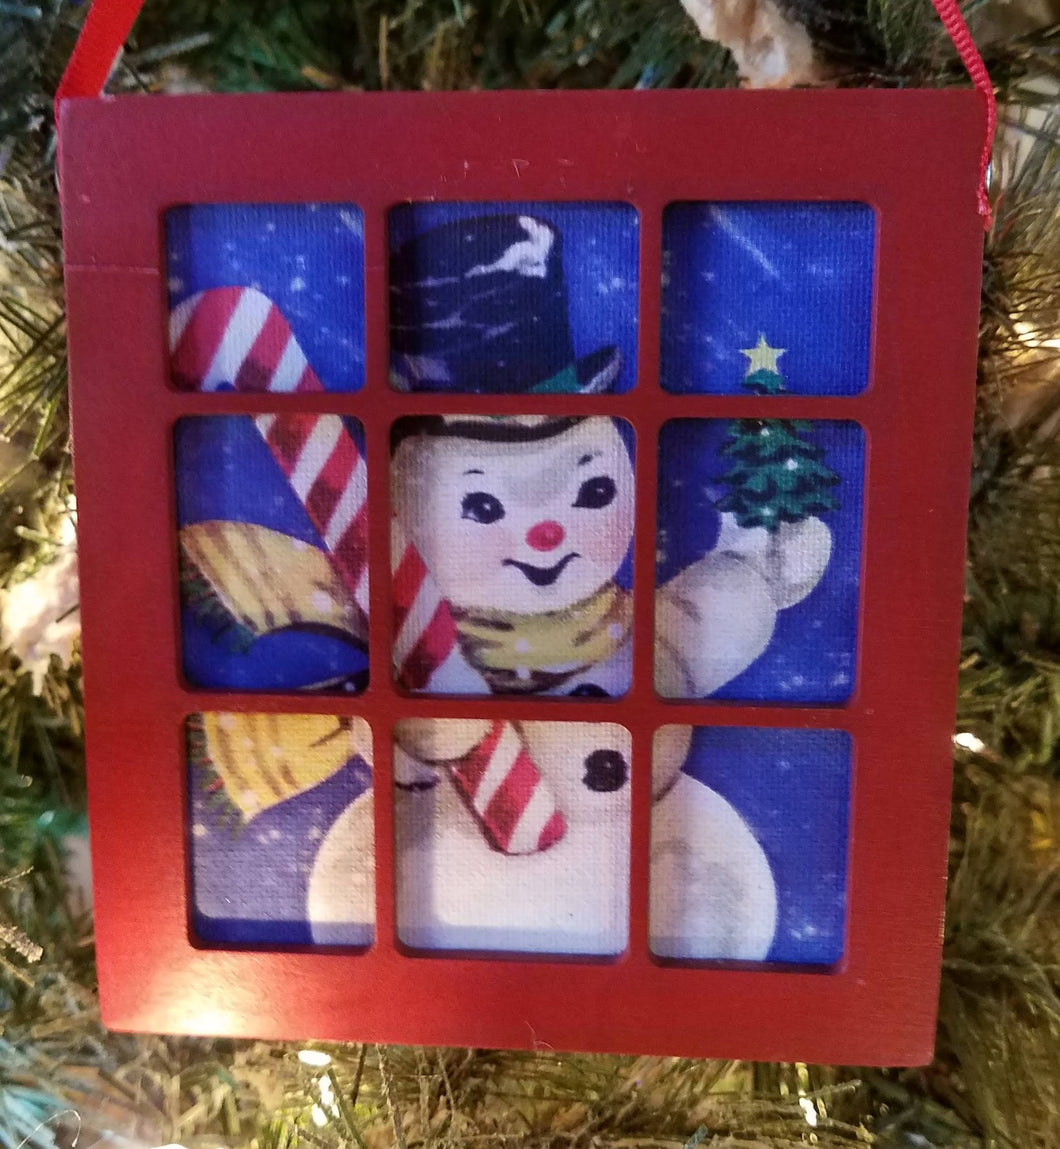 Red window pane ornament with snowman with candy cane - wooden 5